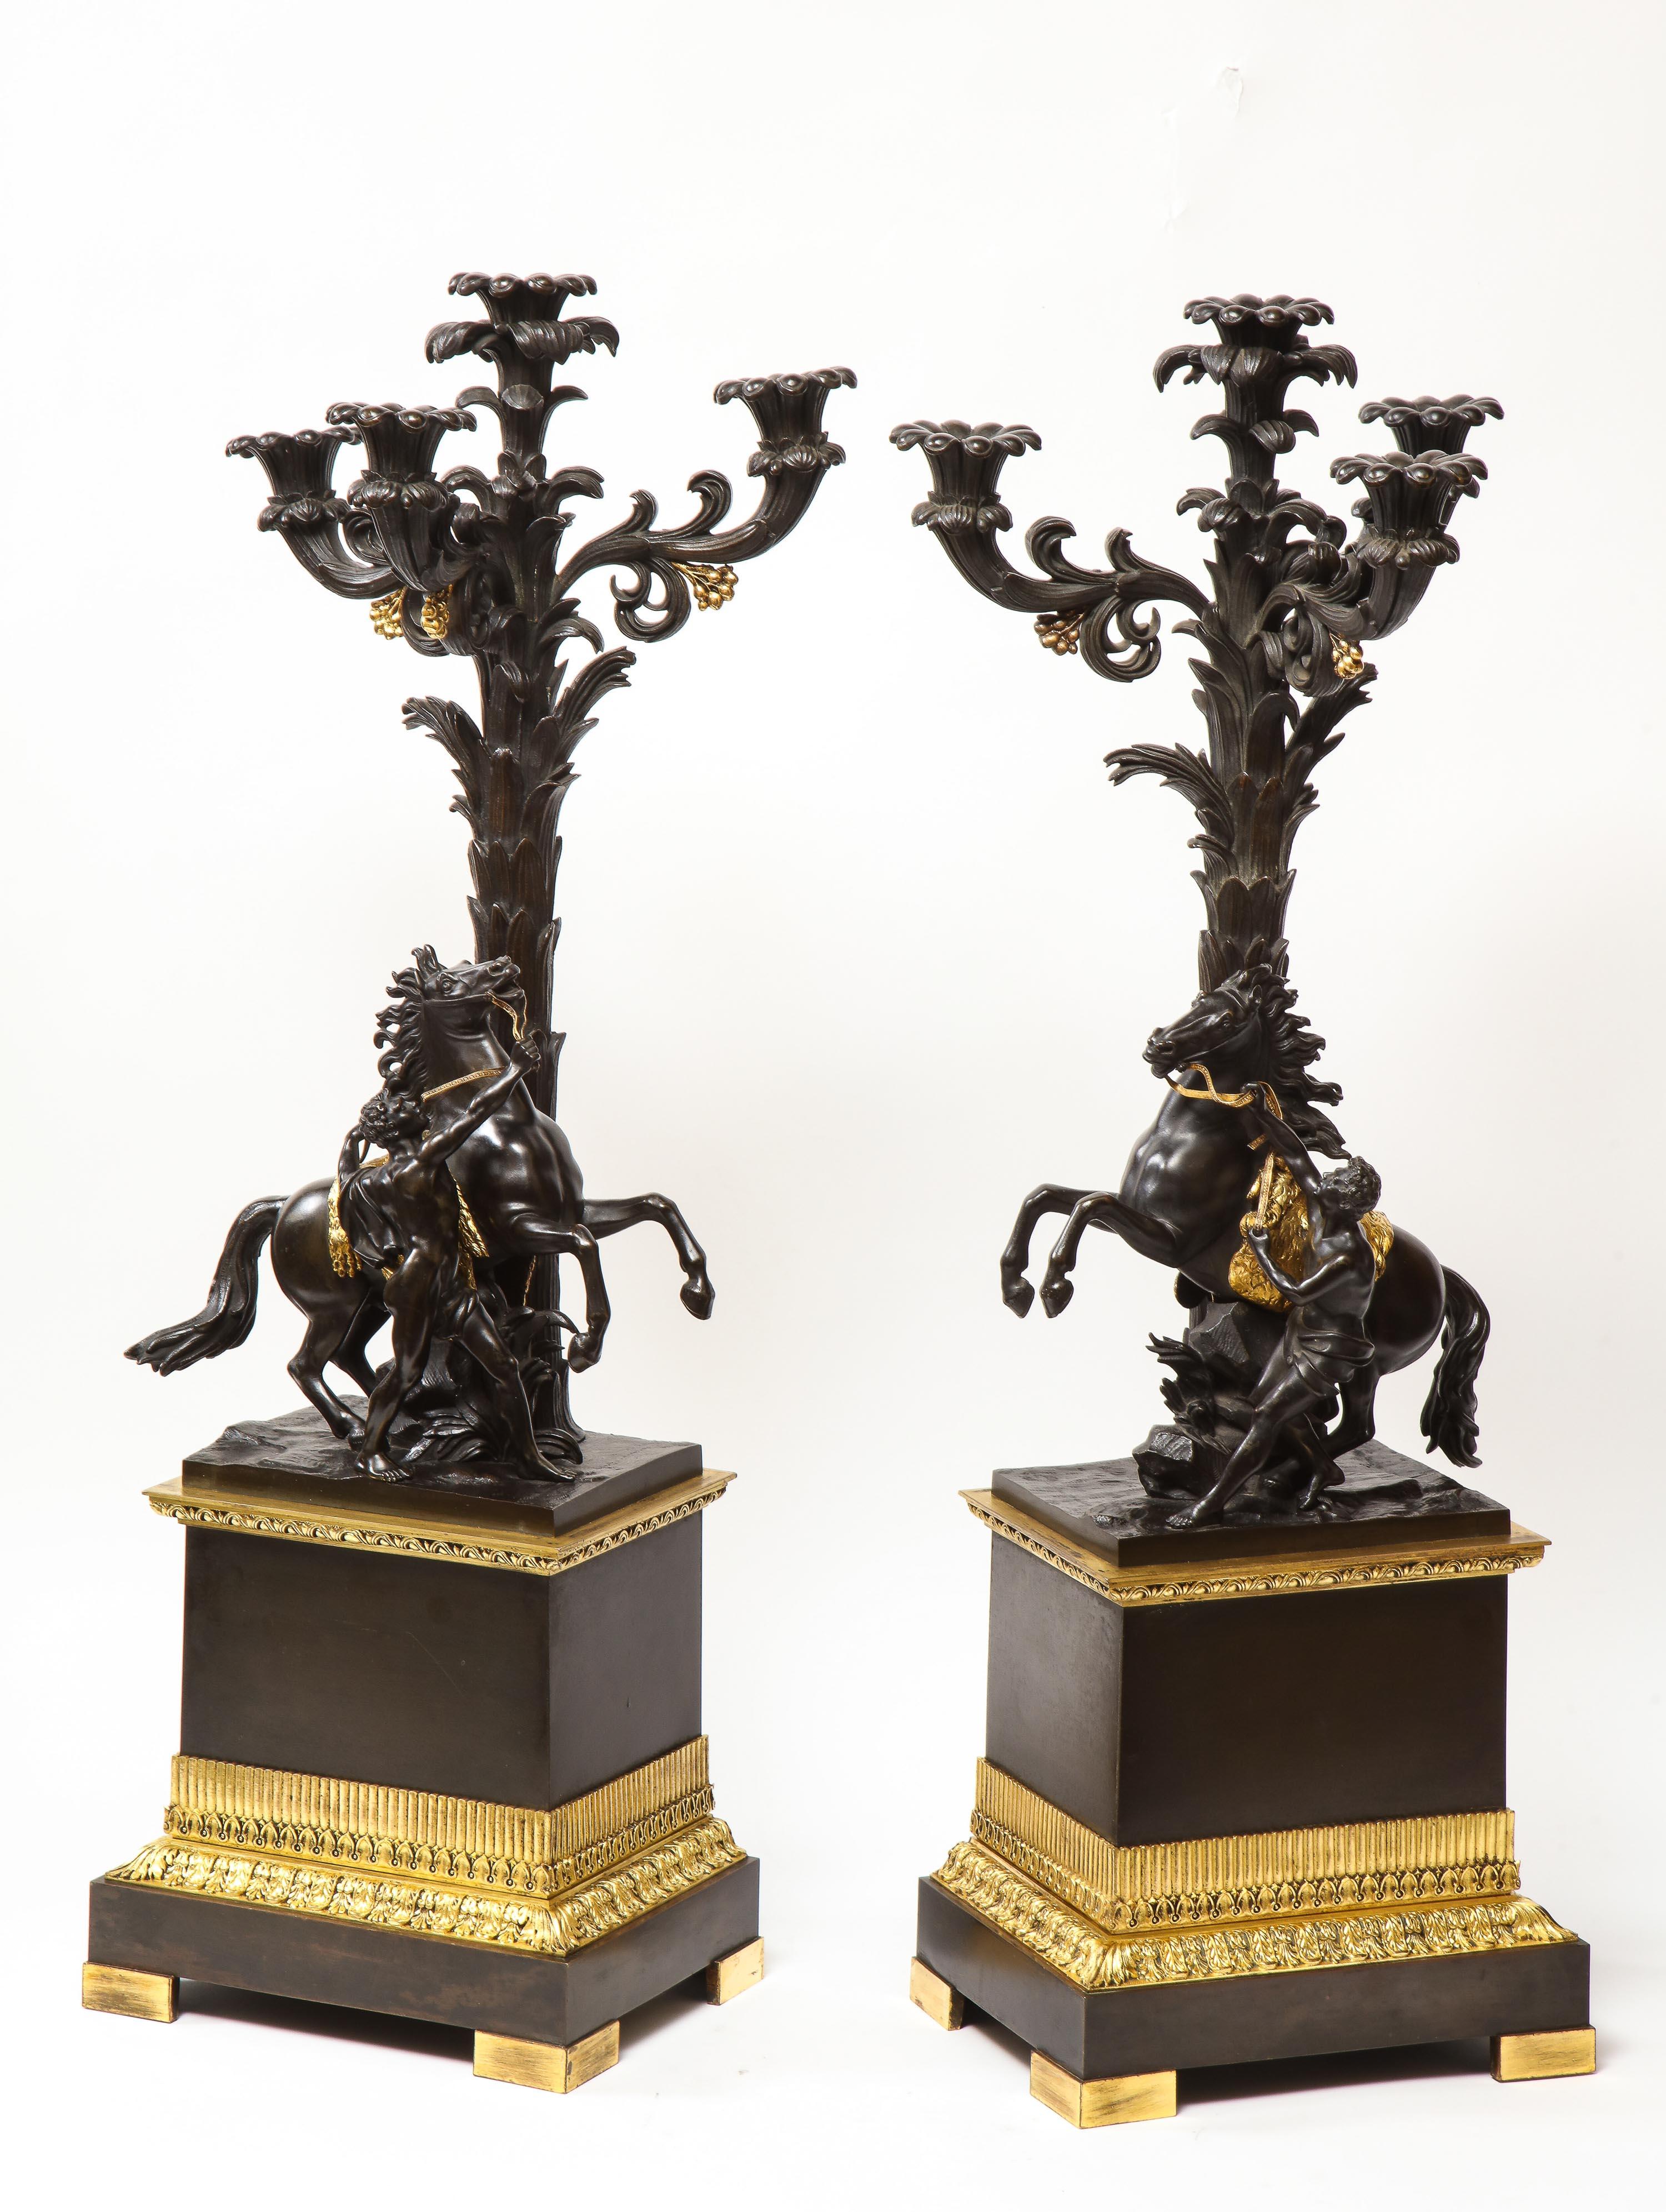 A large and fine pair of French restauration ormolu and patinated bronze four-light candelabra, with Marly Horses, after Guillaume Coustou, circa 1820.

Very fine, elegant and chic. This pair can be also turned into lamps.

Measures: 30